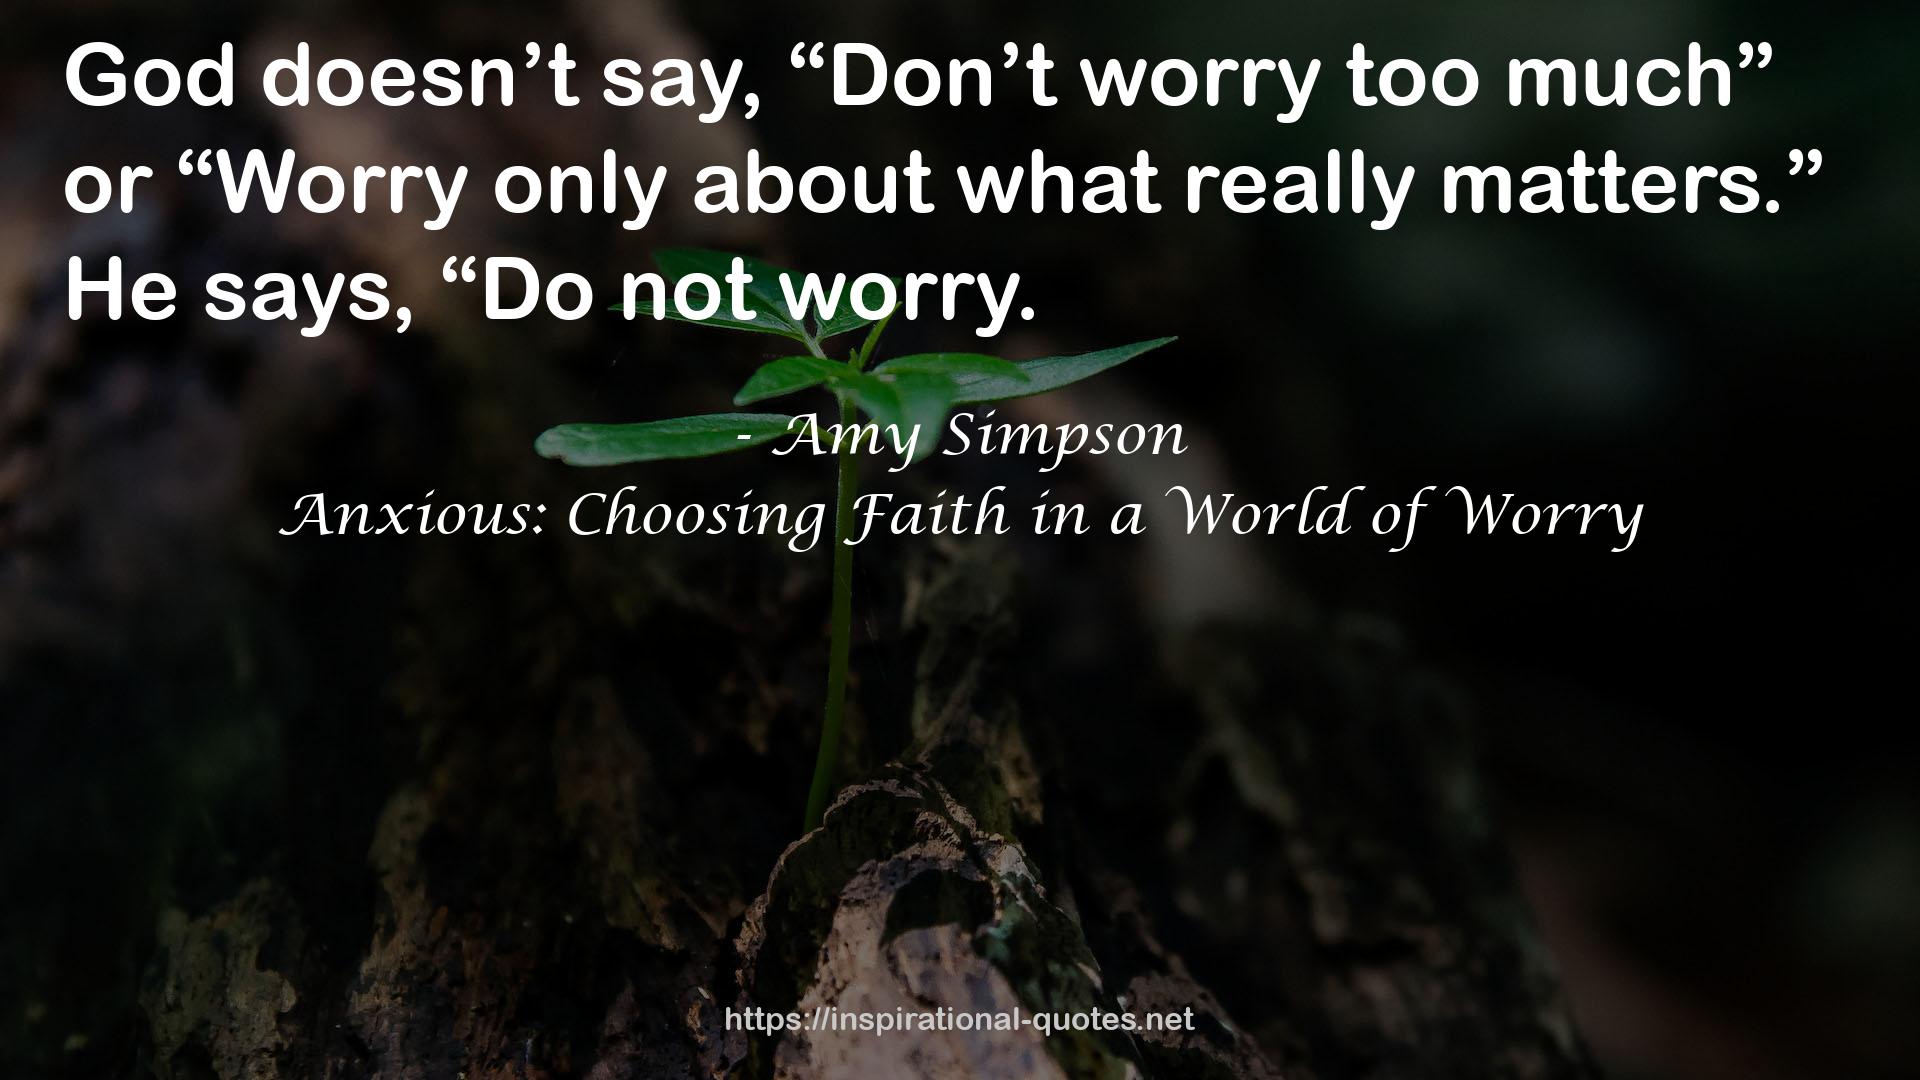 Anxious: Choosing Faith in a World of Worry QUOTES